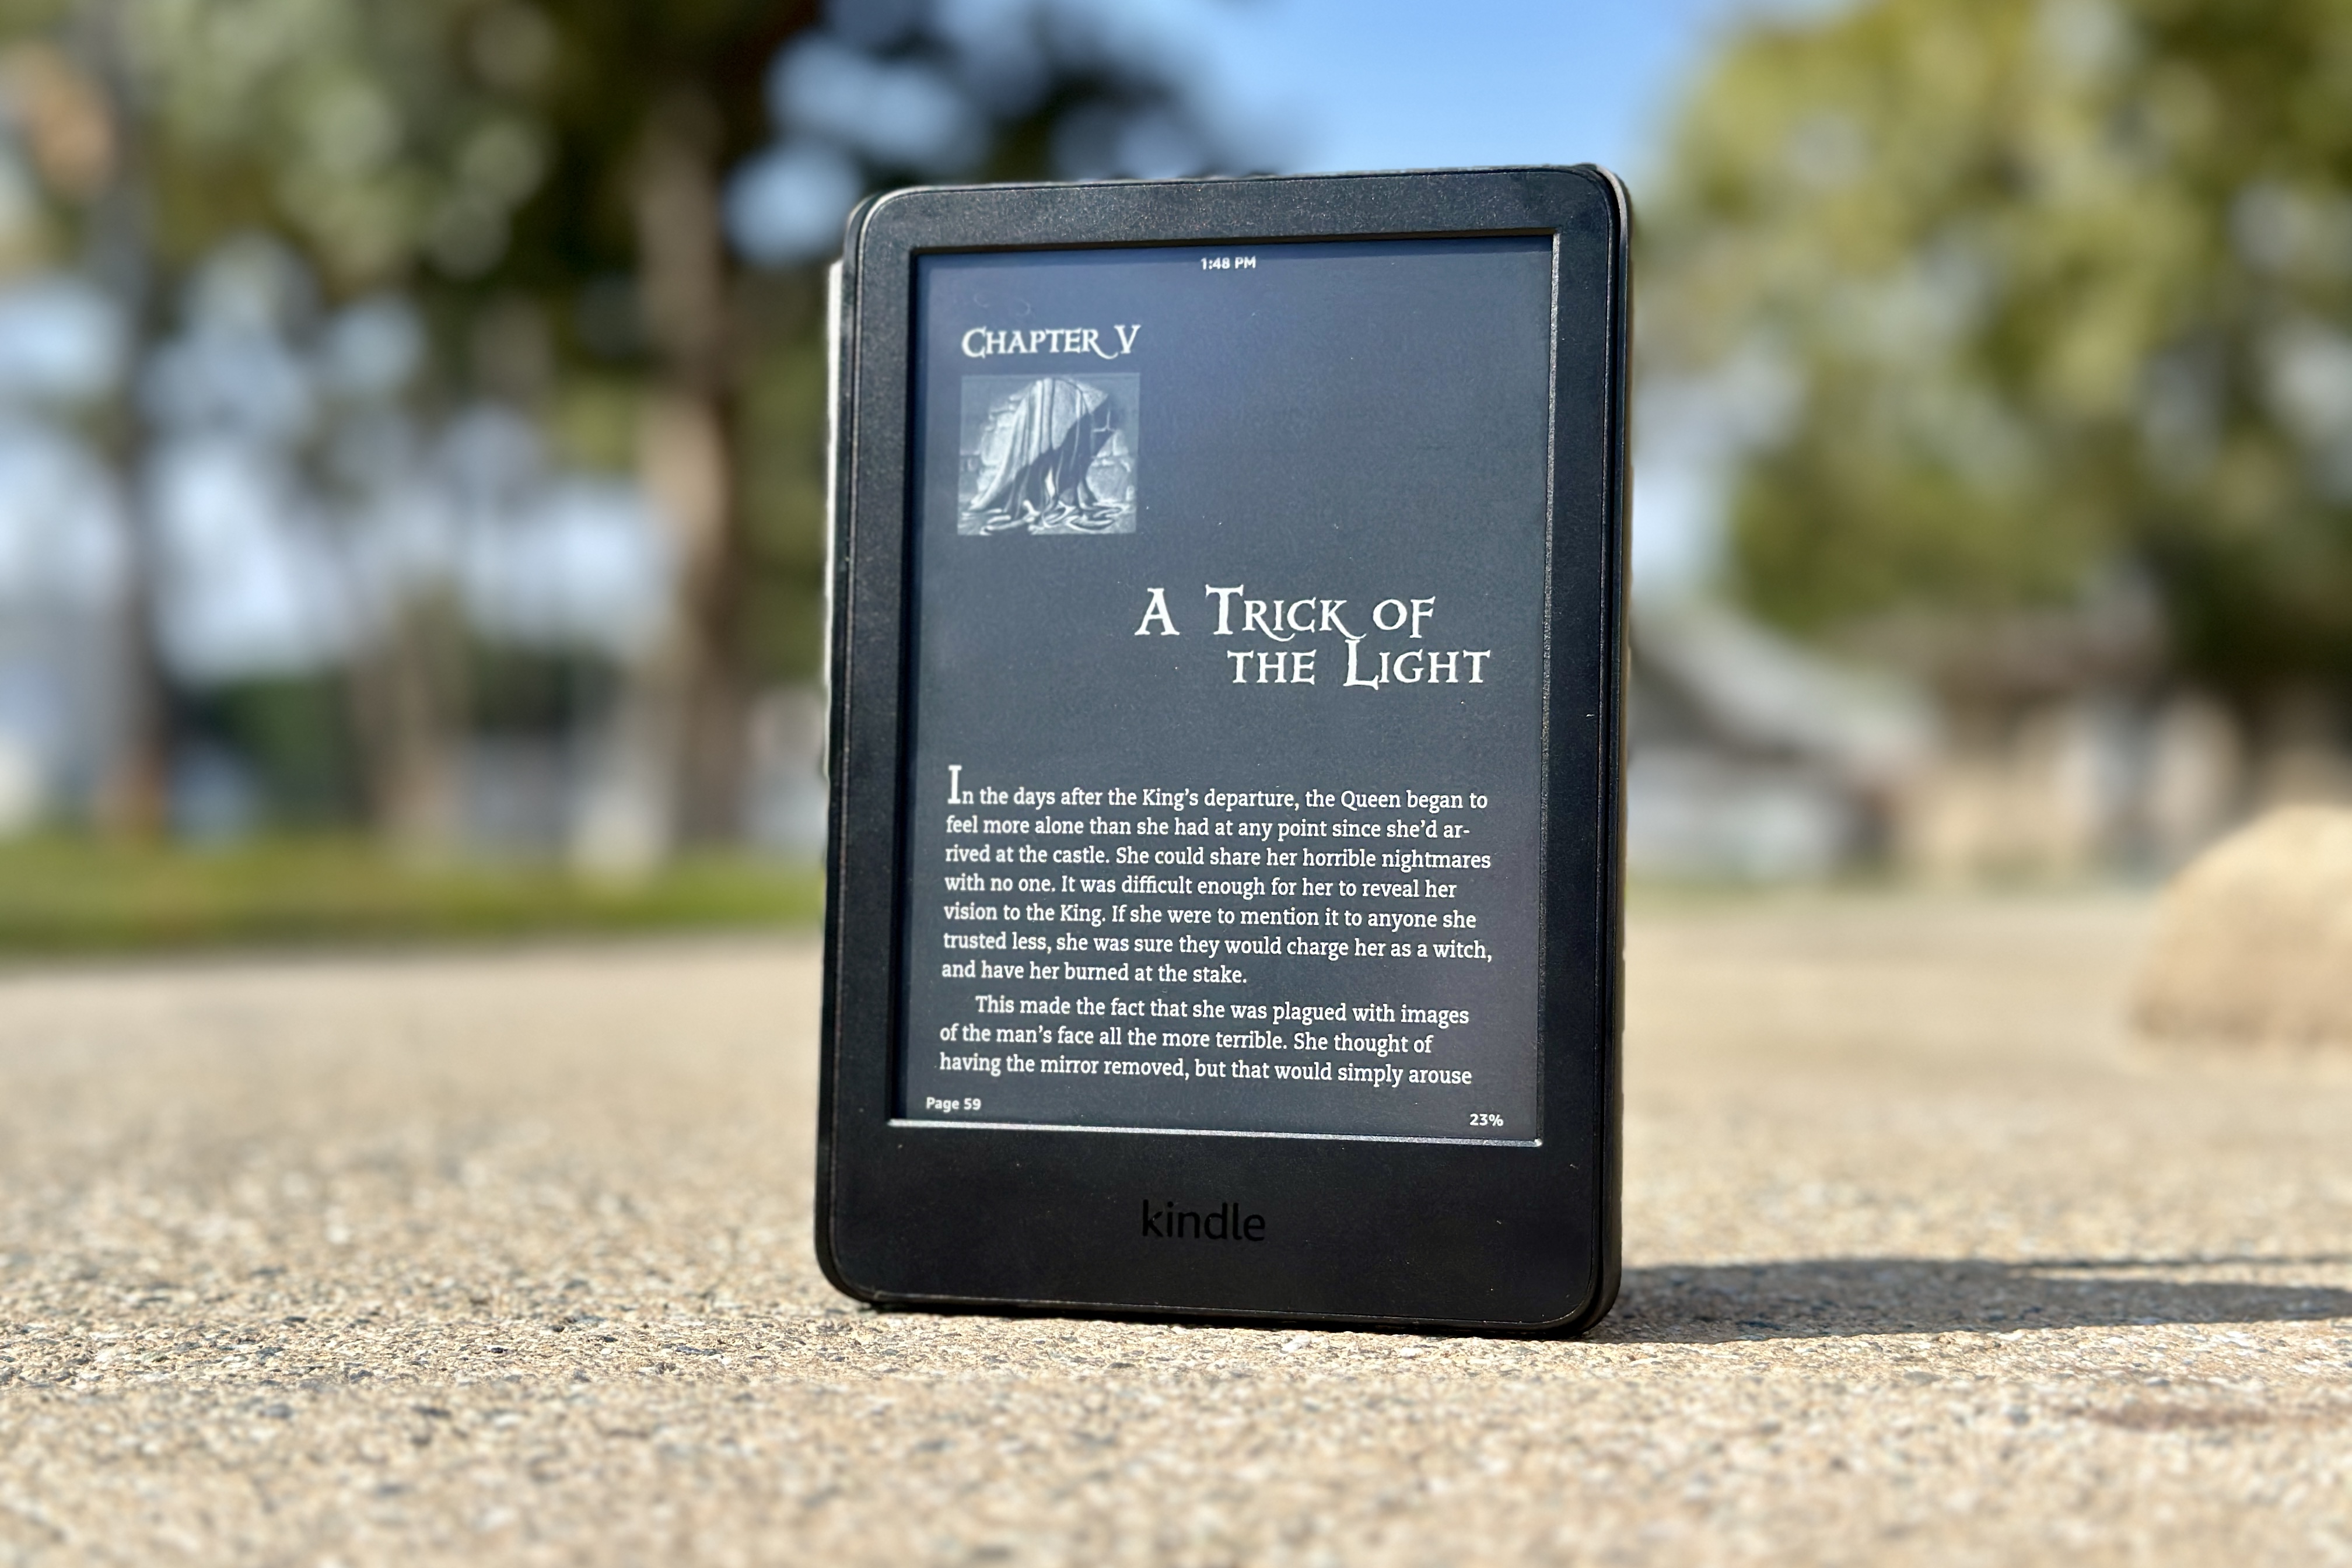 How to convert a Kindle book to PDF (2 easy methods)